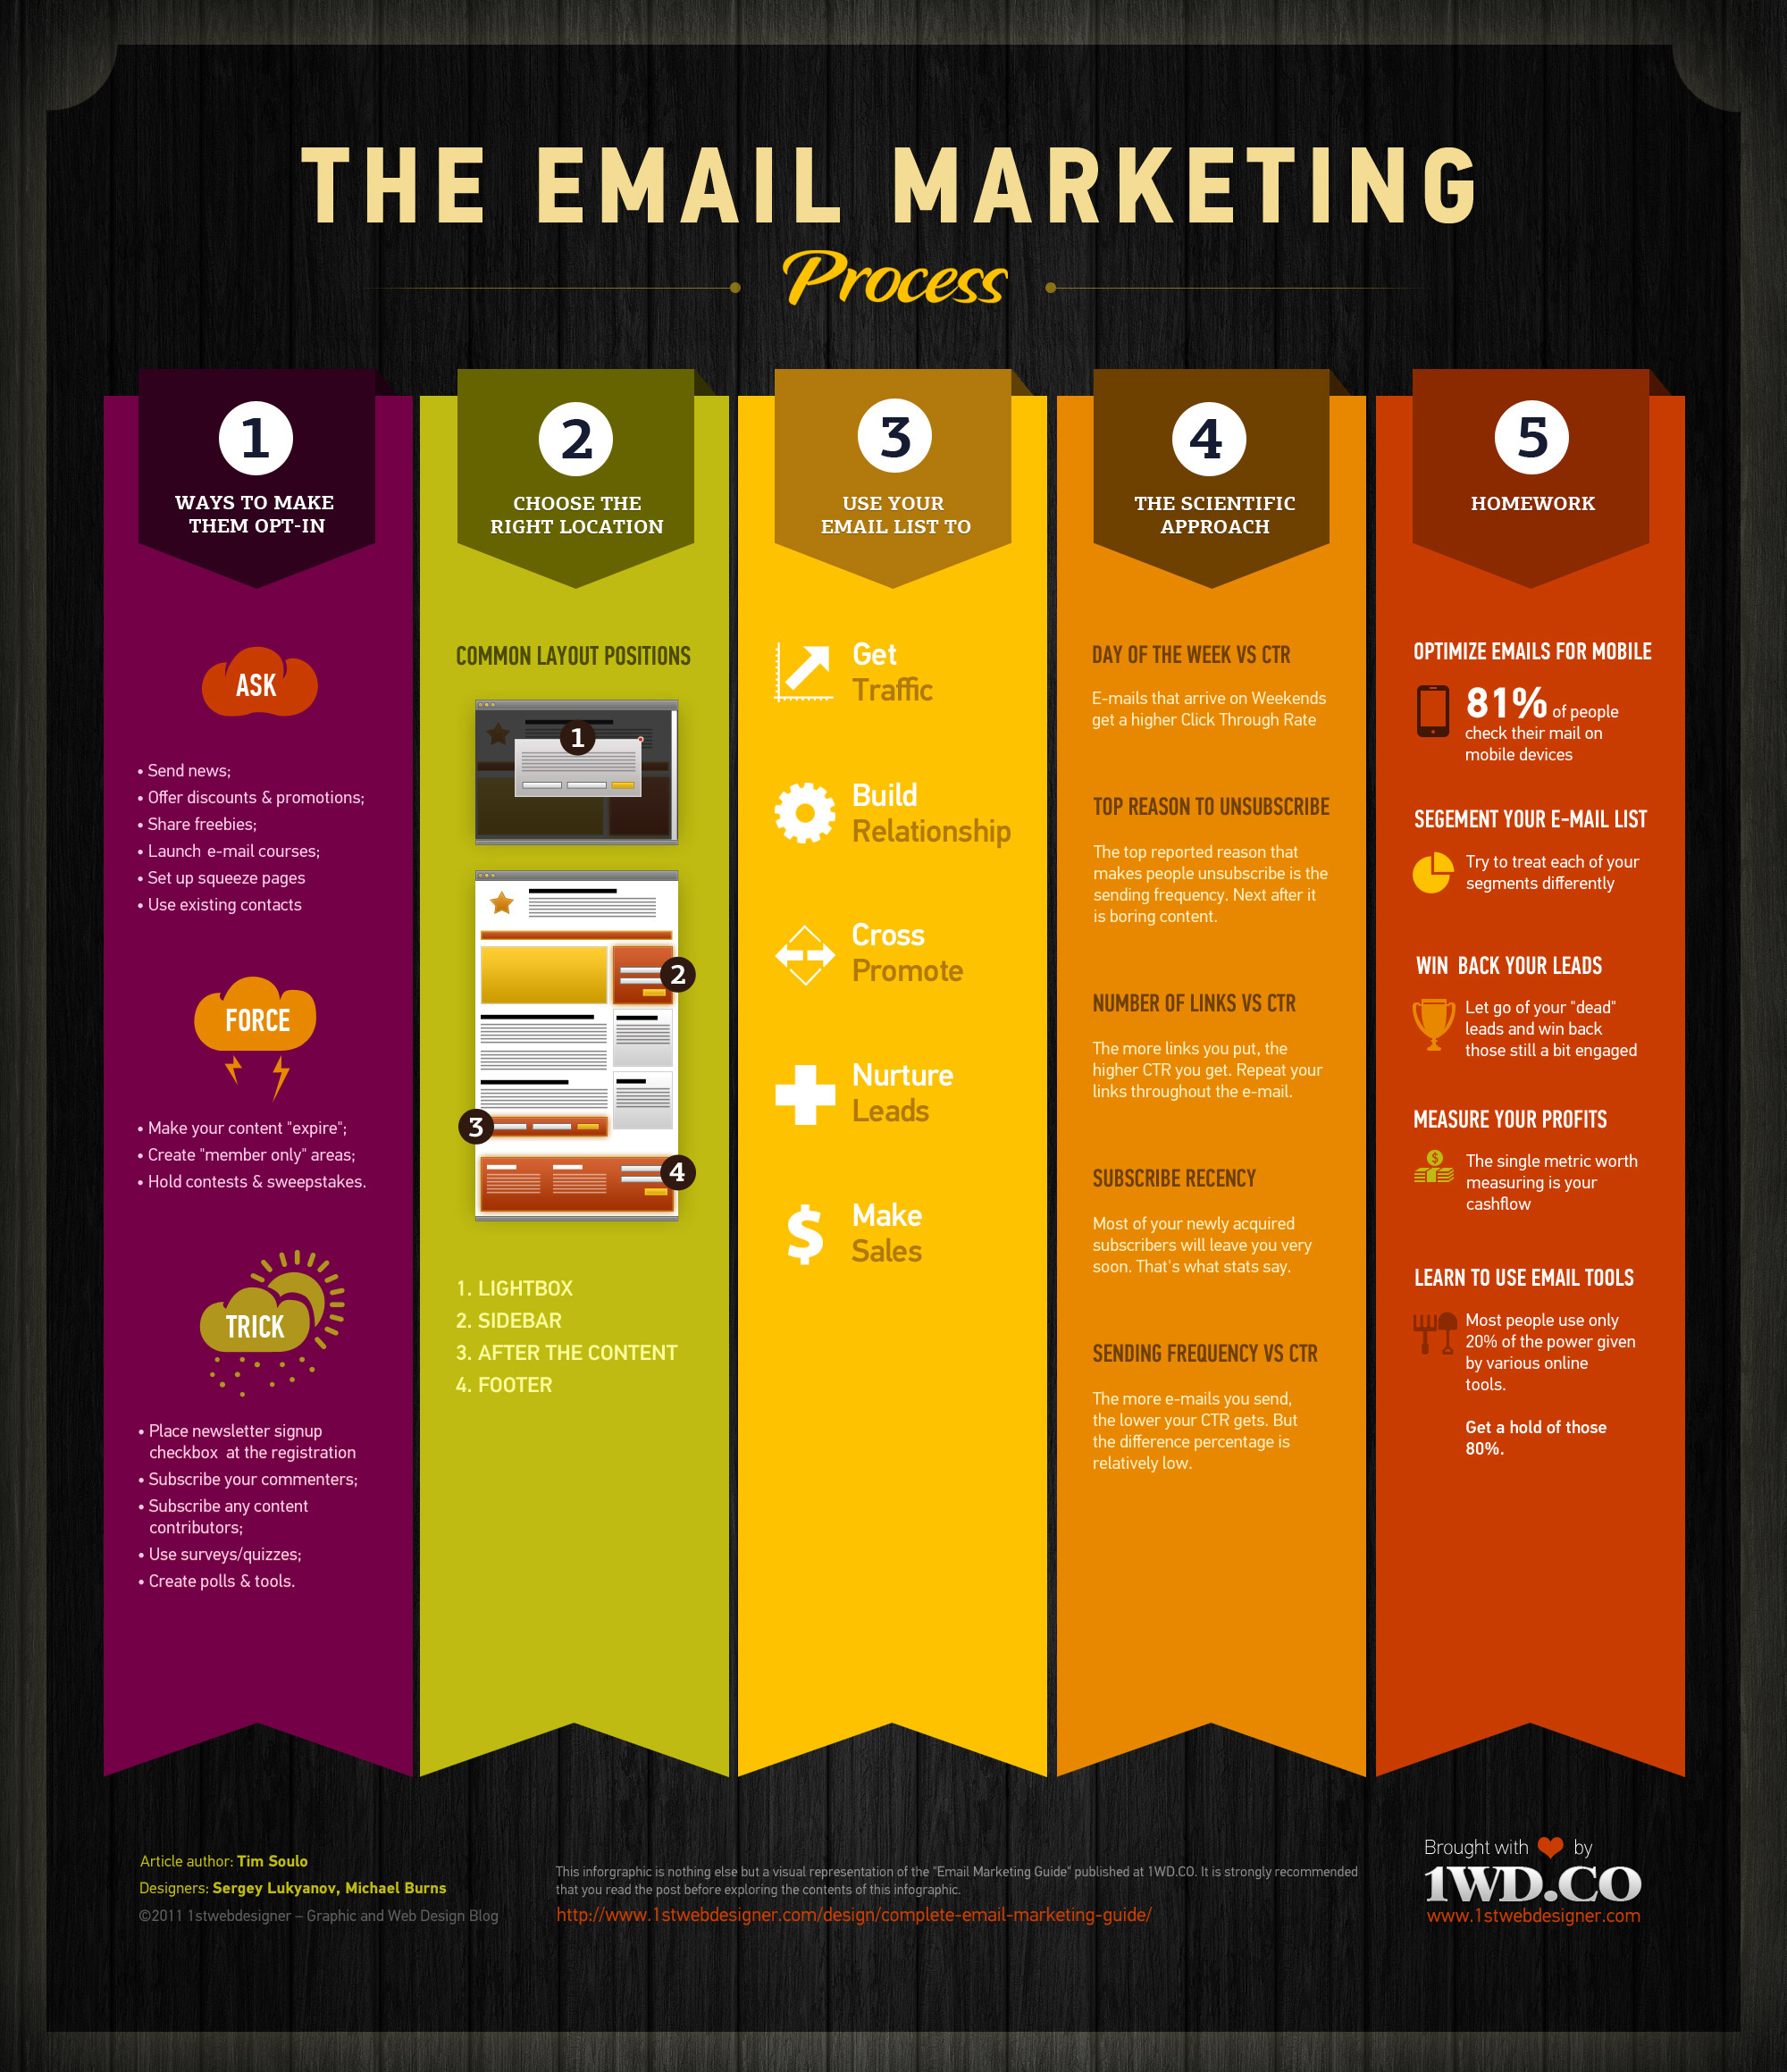 8 Ways To Spice Up Your Email Marketing - Tips and Tricks